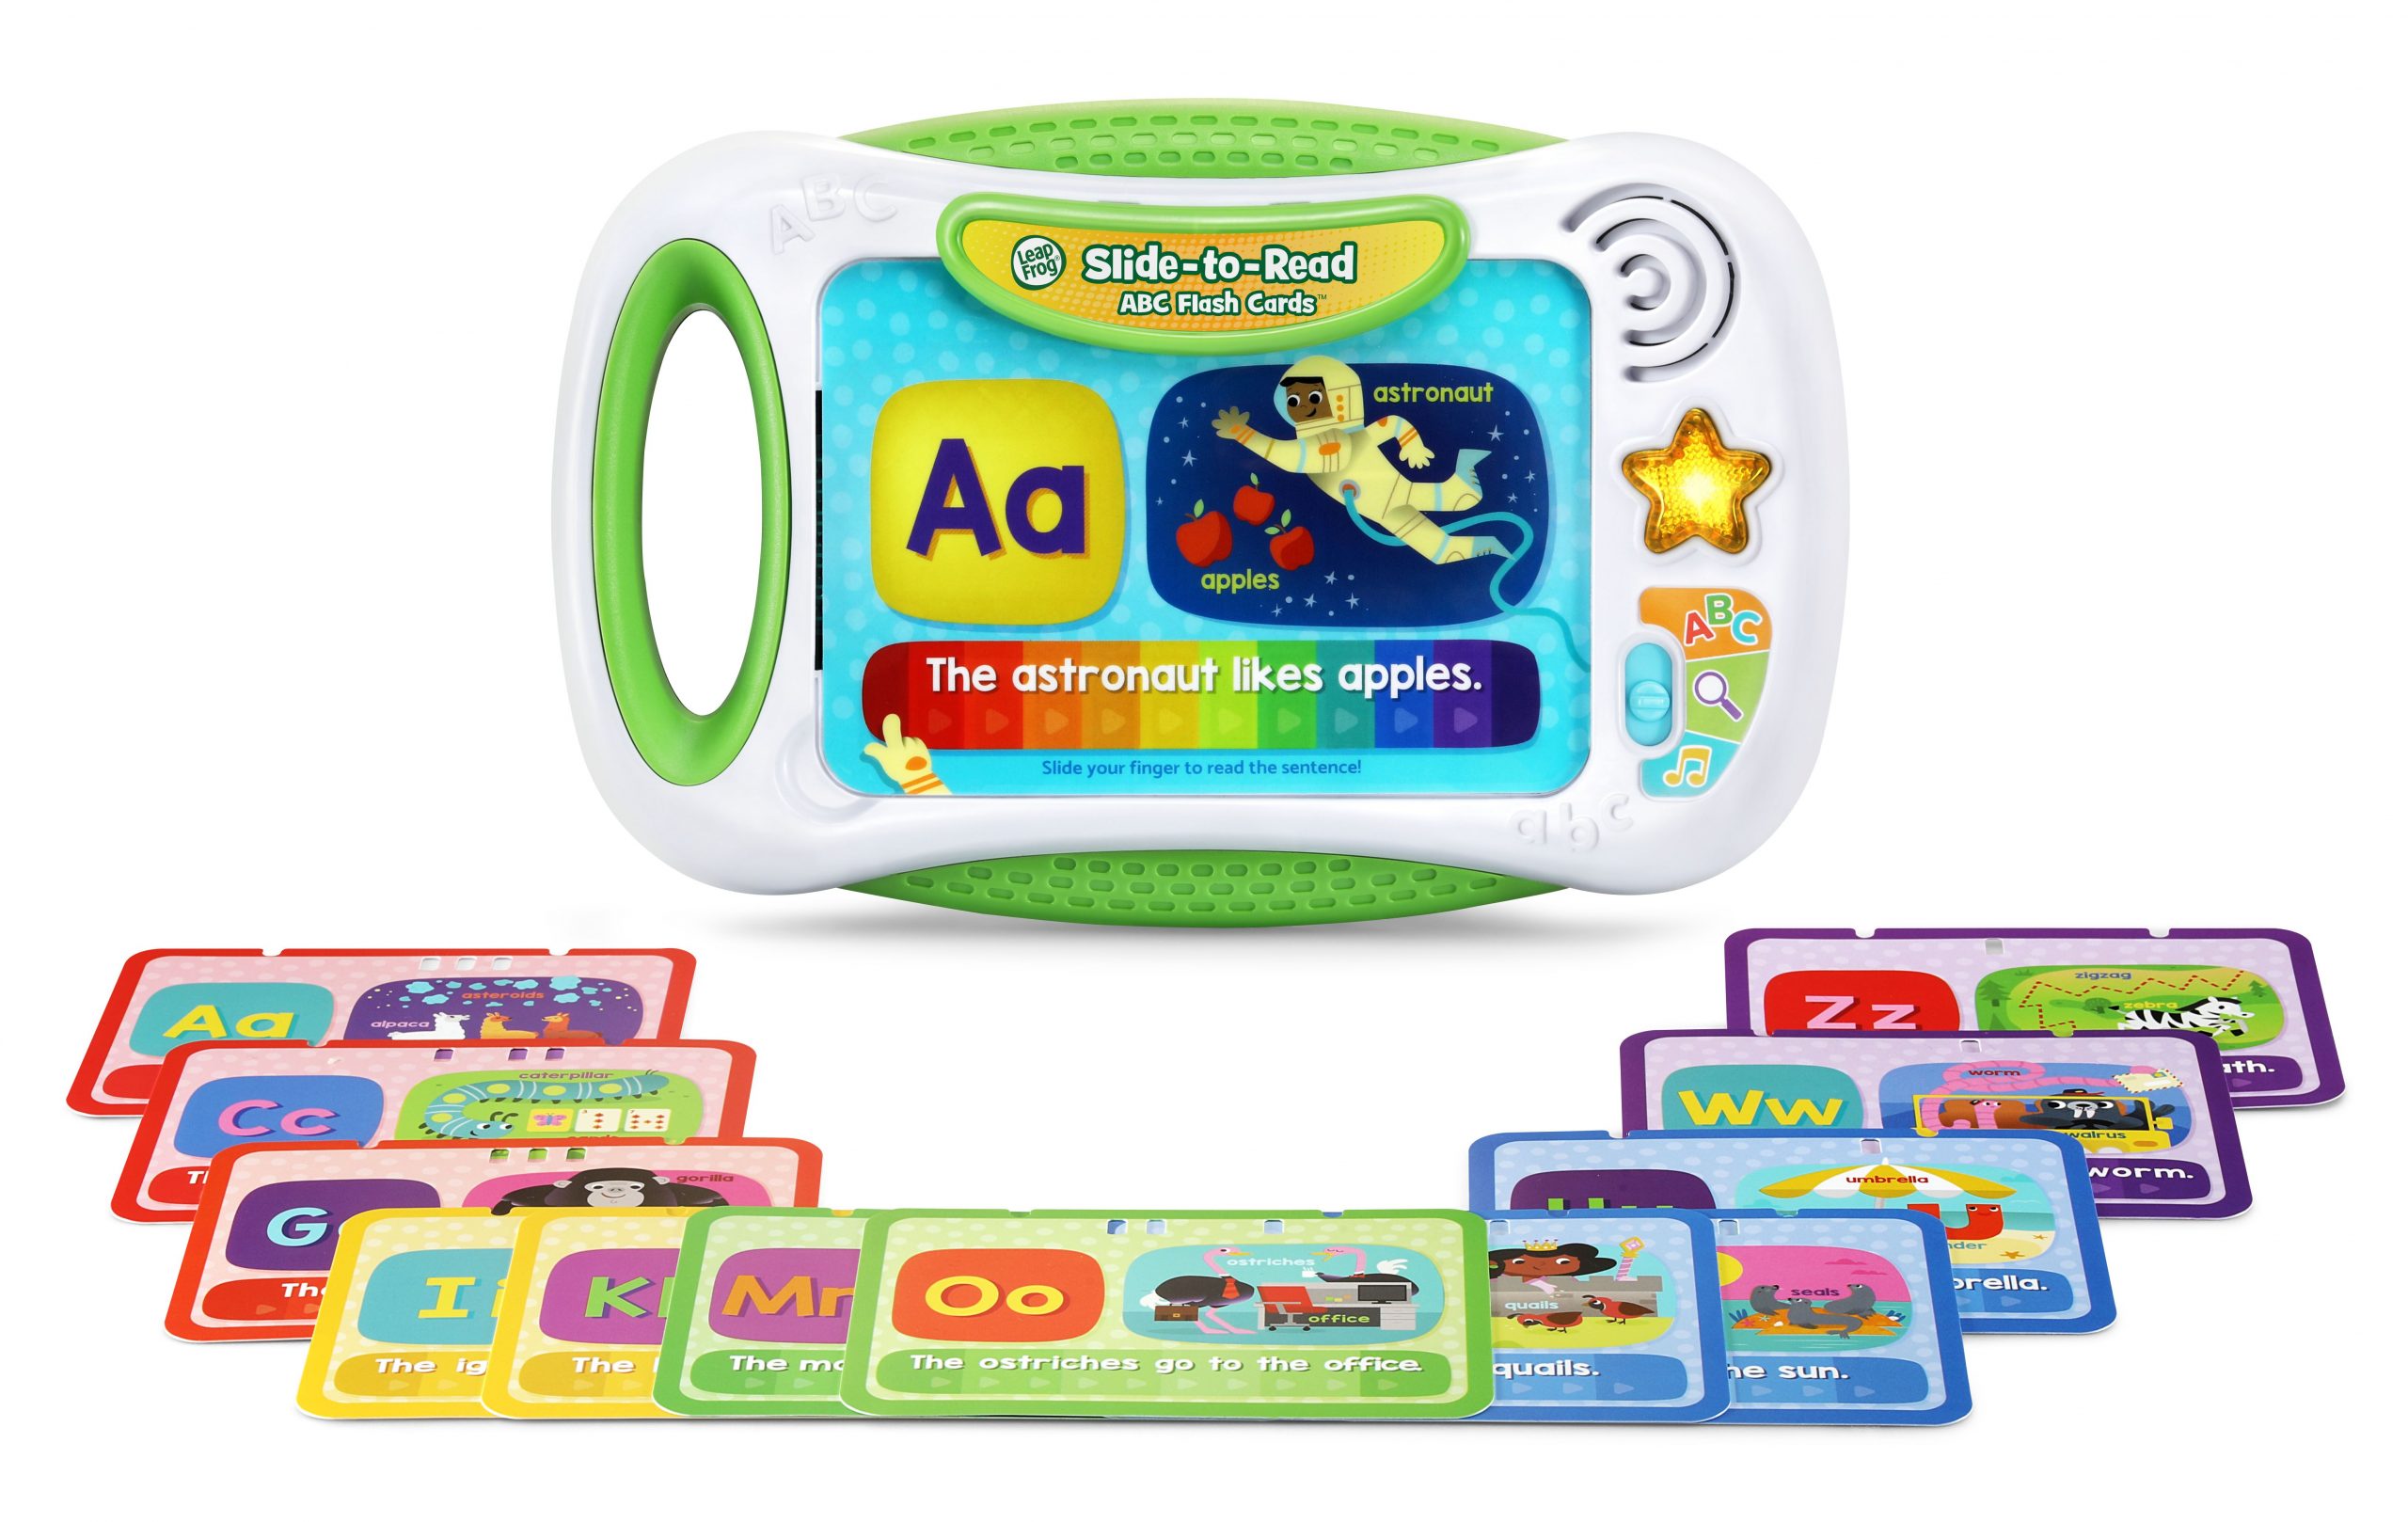 LeapFrog® Slide-to-Read ABC Flash Cards™